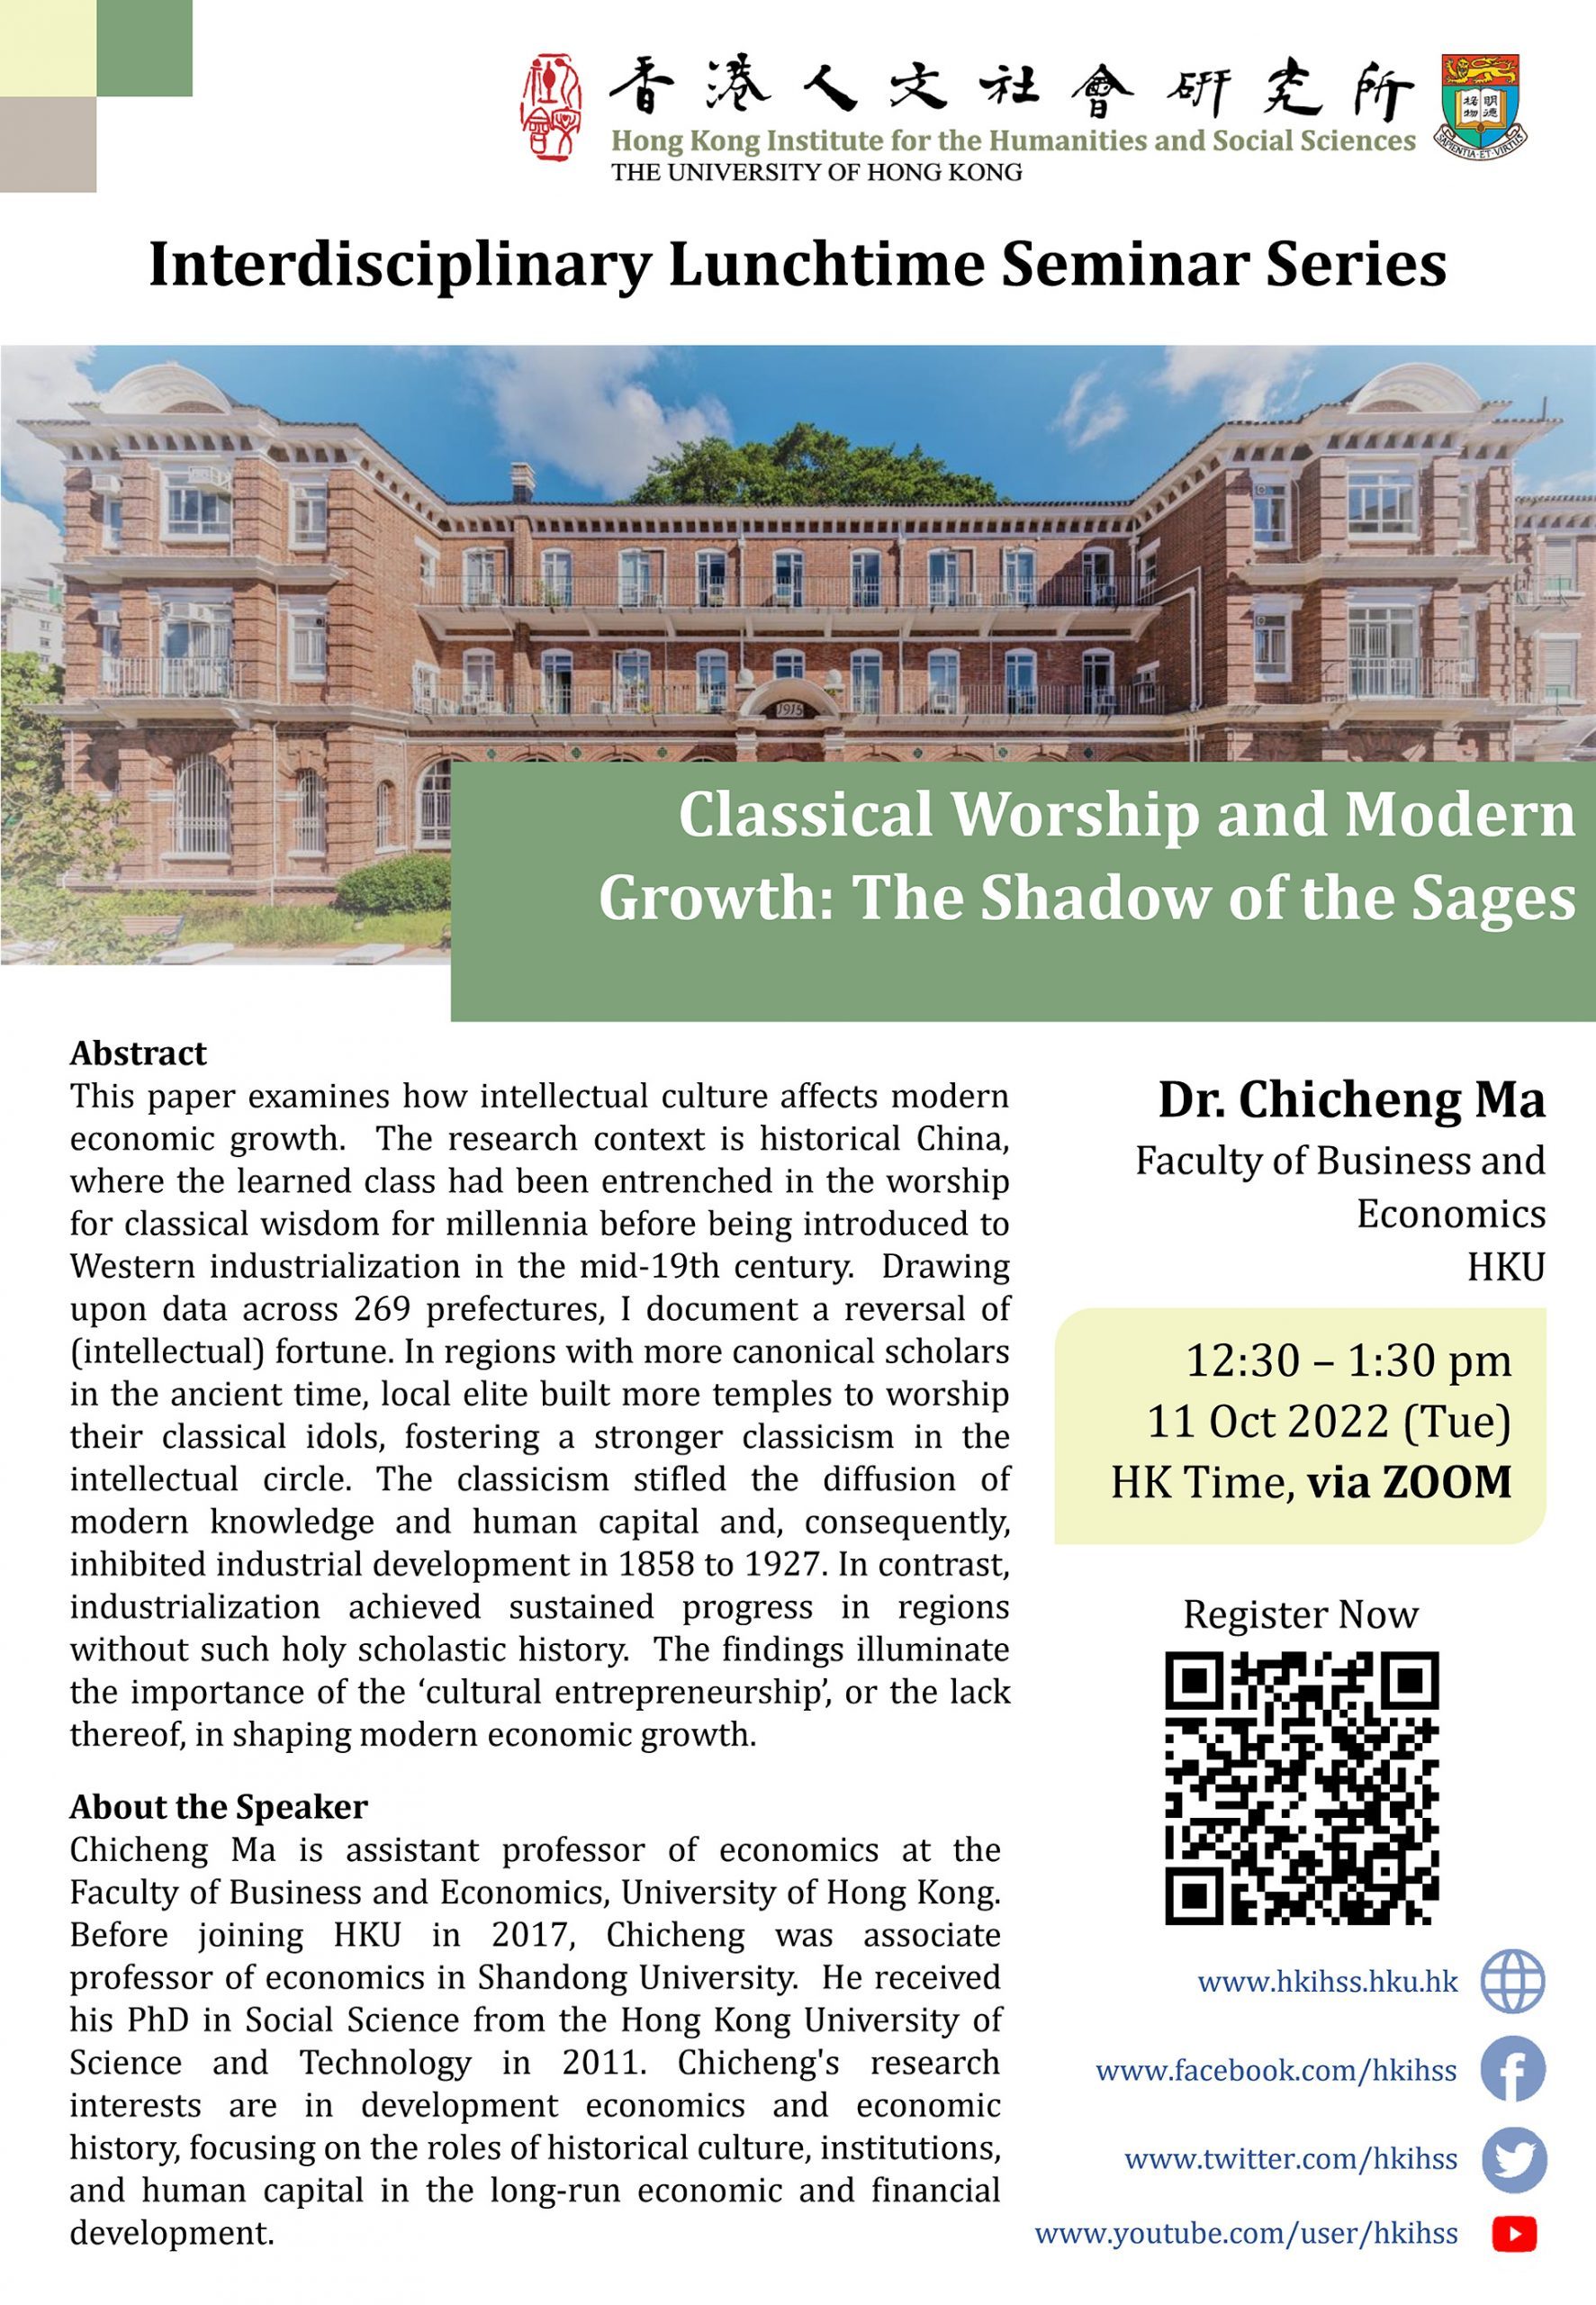 Interdisciplinary Lunchtime Seminar on “Classical Worship and Modern Growth: The Shadow of the Sages” by Dr. Chicheng Ma (October 11, 2022)